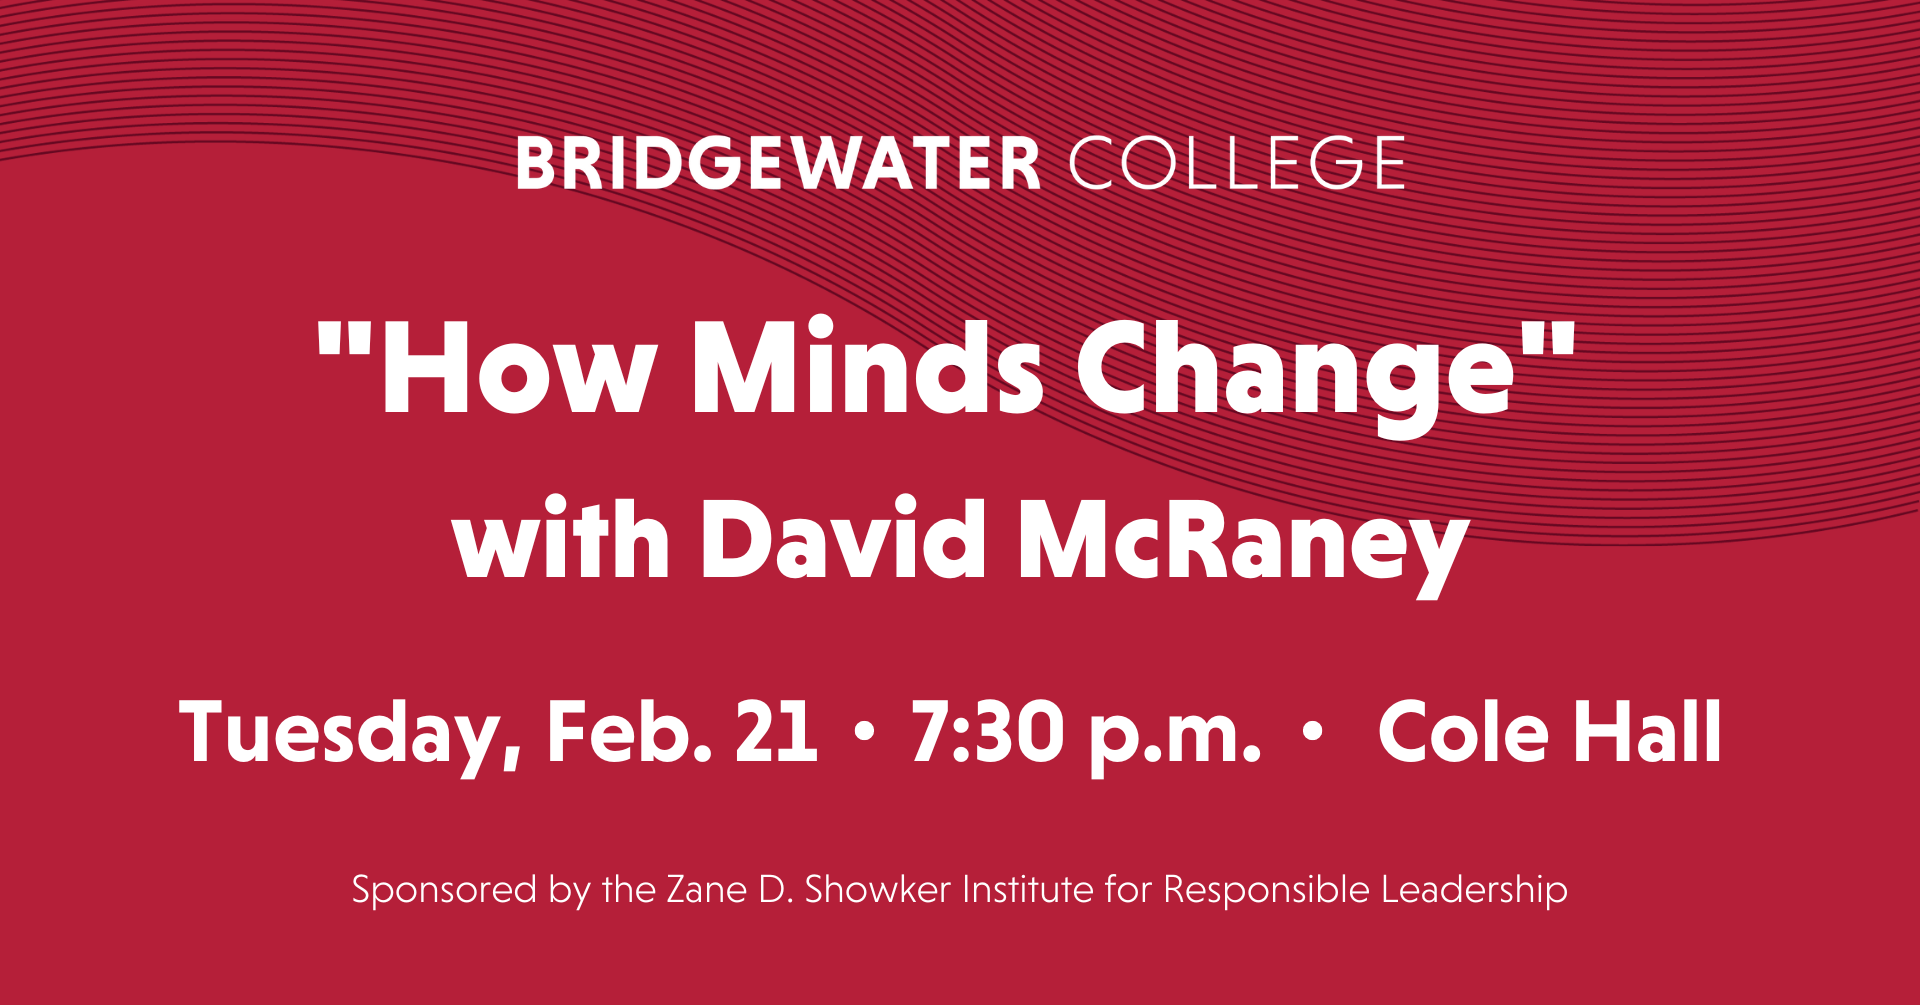 Bridgewater College "How Minds Change" with David McRaney. Tuesday Feb. 21, 7:30 p.m. Cole Hall. Sponsored by the Zane D. Showker Institute for Responsible Leadership